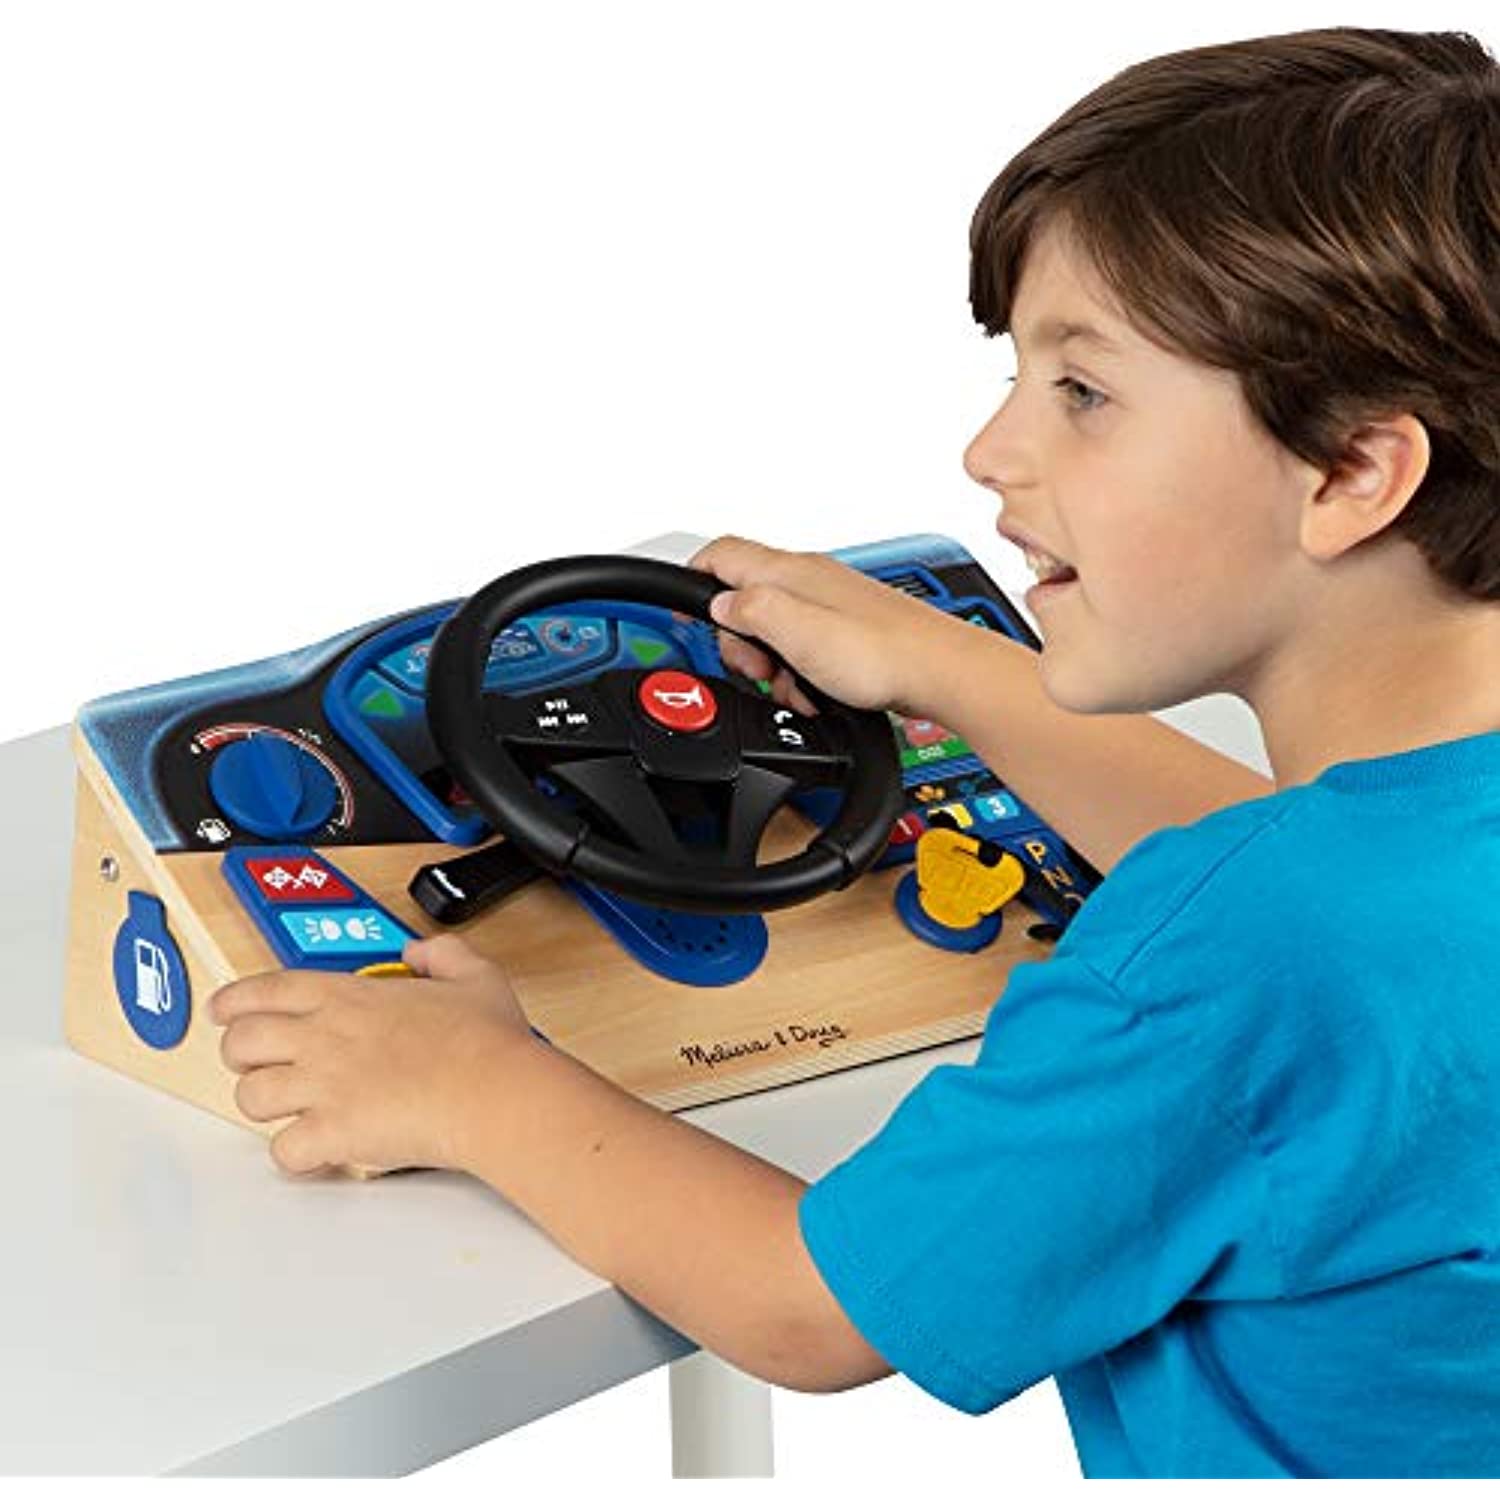 Melissa & Doug Vroom & Zoom Interactive Wooden Dashboard Pretend Play Driving Toy